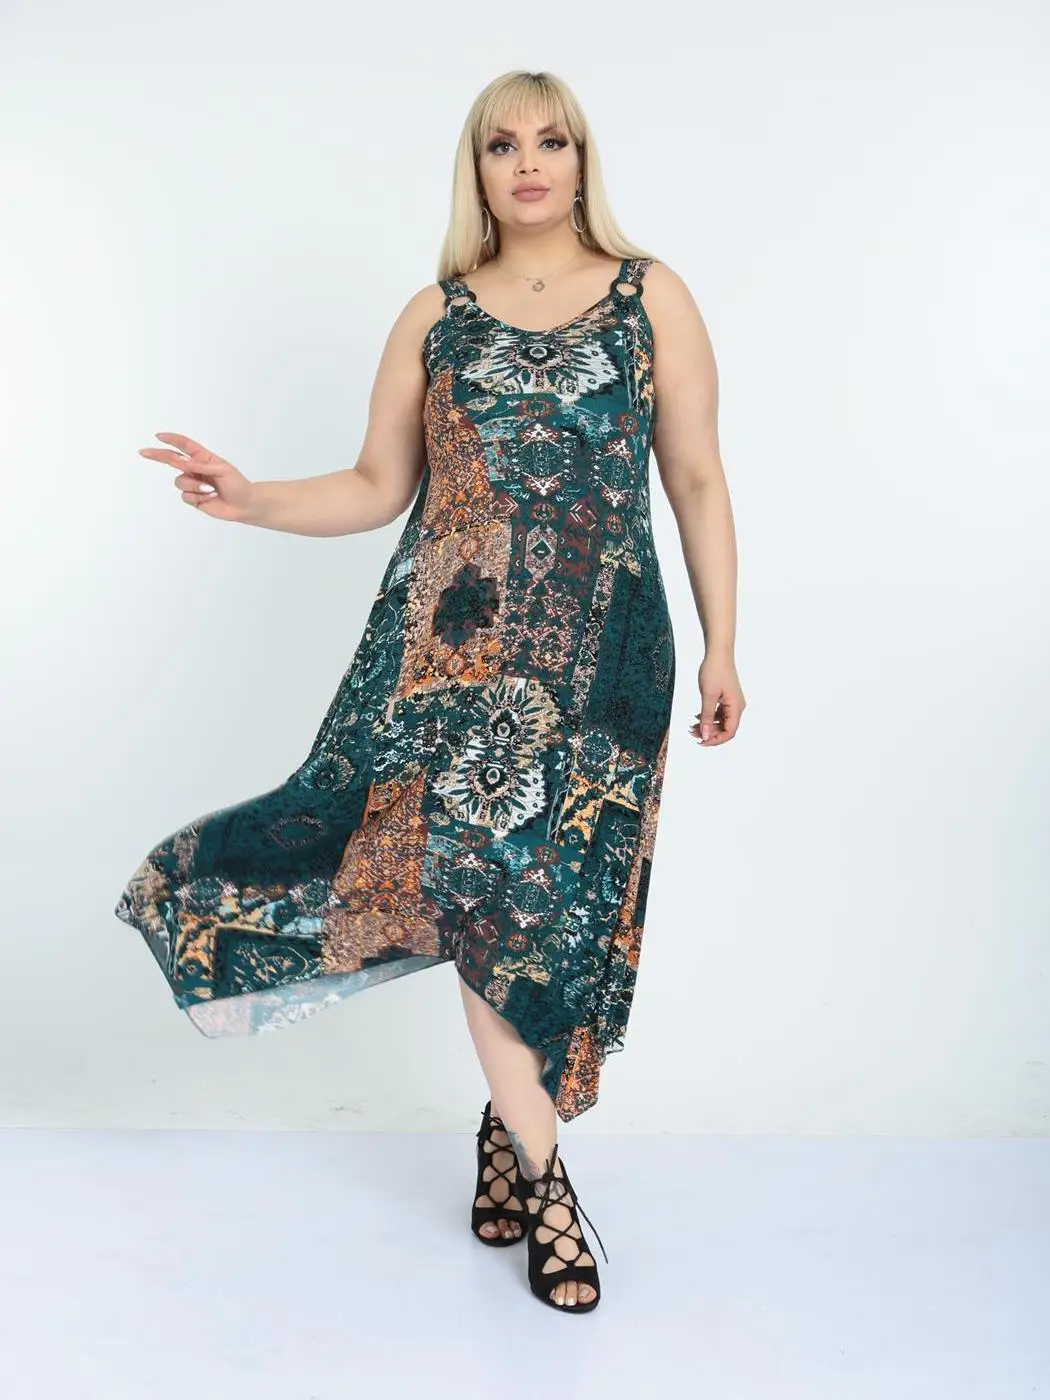 

Plus Size Women Clothing 2022 Asymmetrical Sleeveless Dress Green Ethnic Ankle-Length Lycra Knitted Viscose Made in Turkey